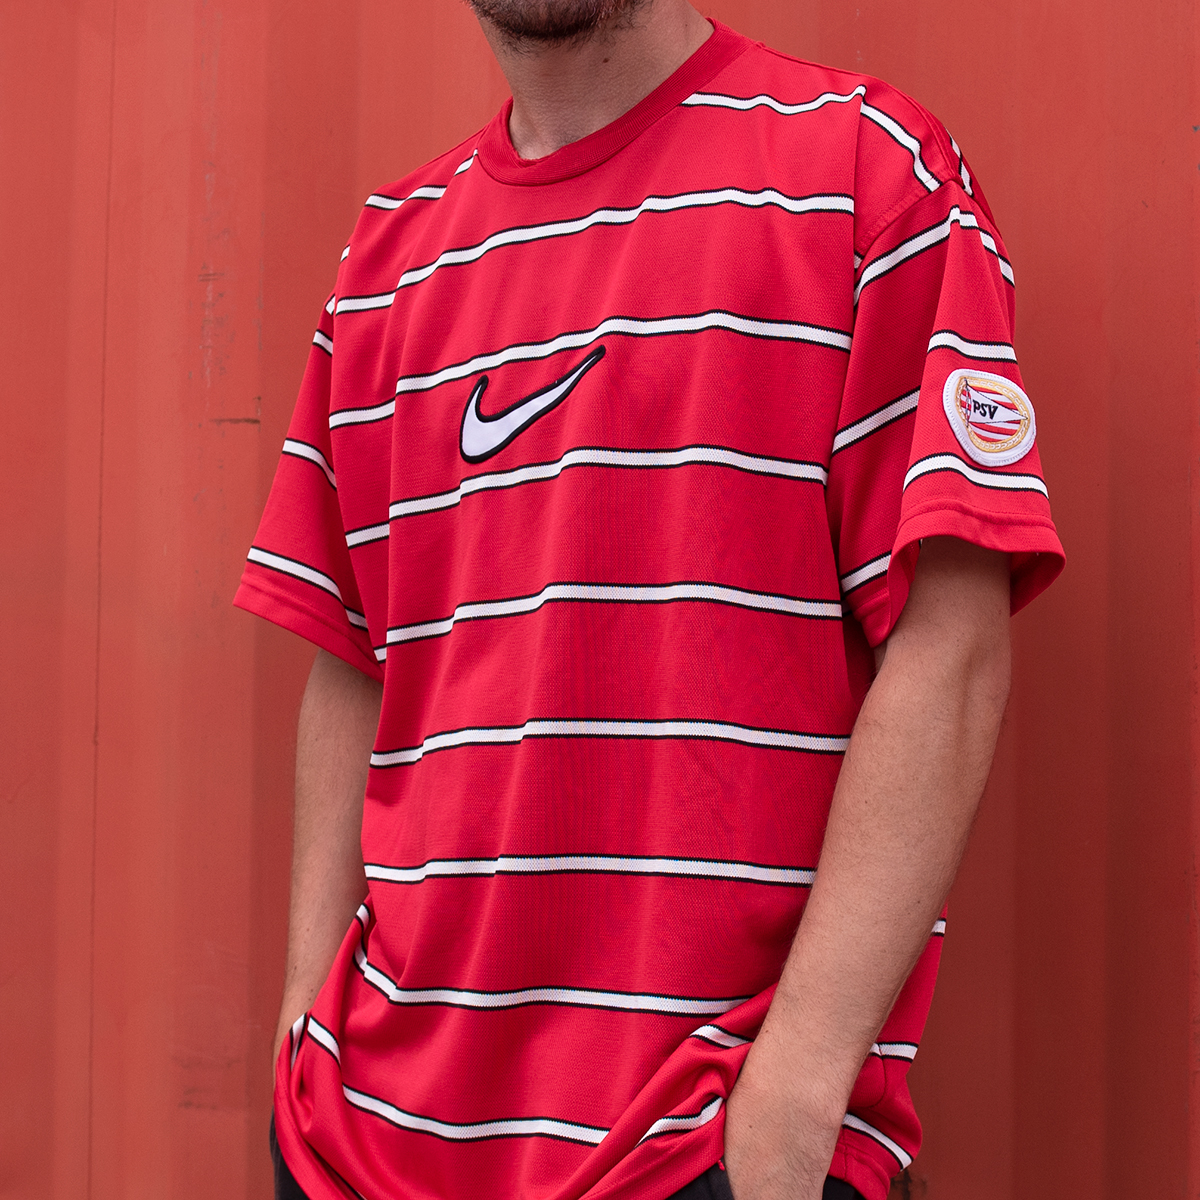 uitspraak formaat Haven Classic Football Shirts on Twitter: "PSV 90s Training by Nike 🇳🇱 Hitting  the site on July 14th! https://t.co/aFRD3ycuow" / Twitter